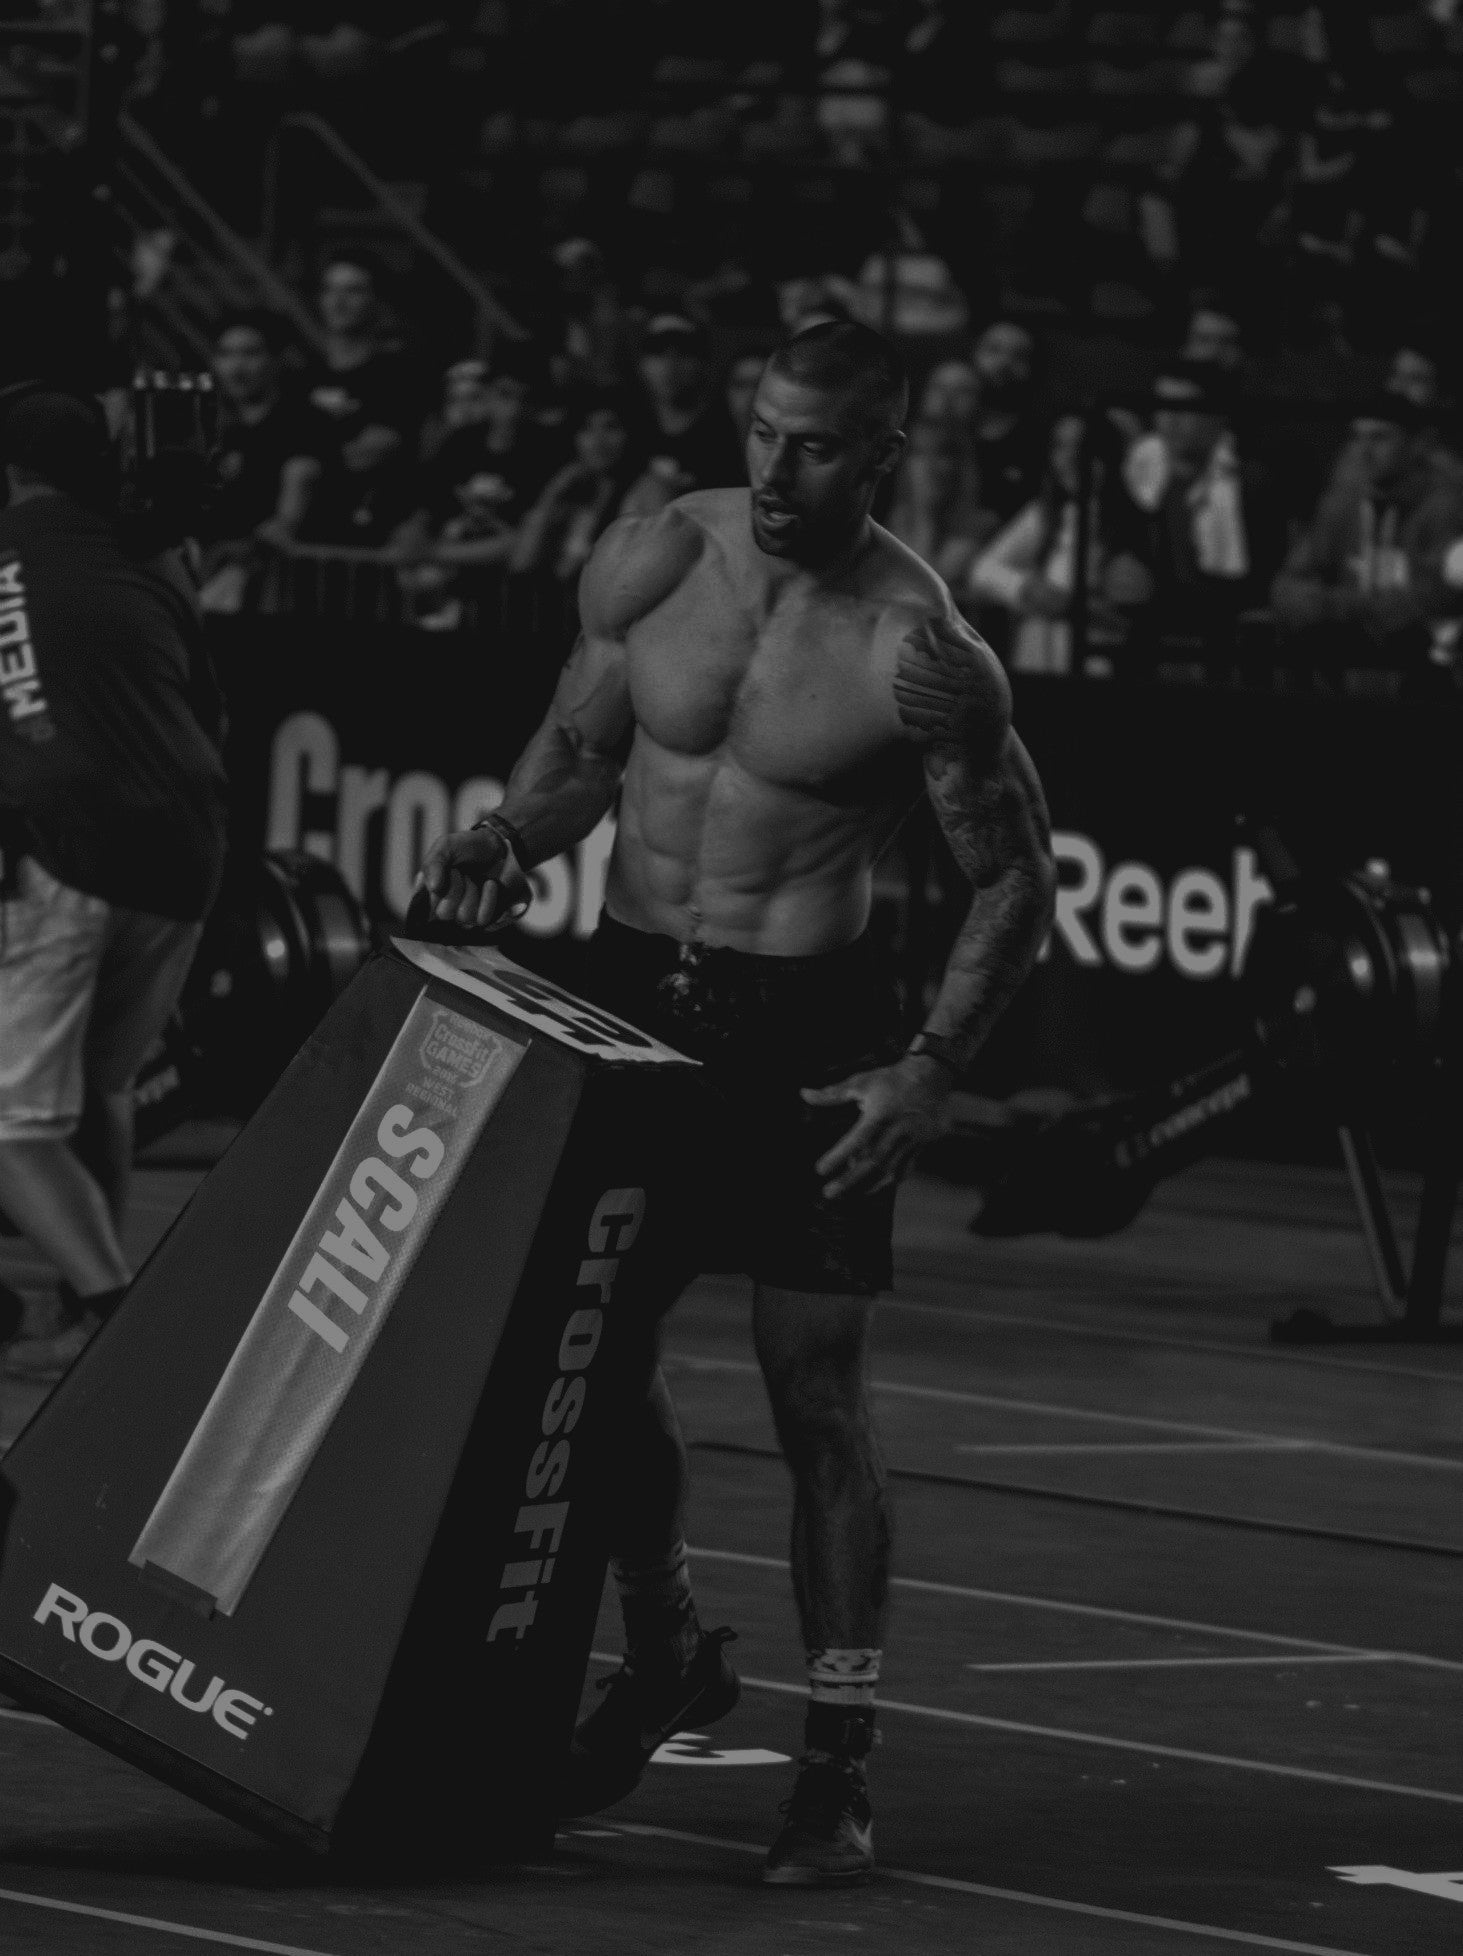 CrossFit Games Athlete Thigh Circumference vs. Strength: How do you stack up?